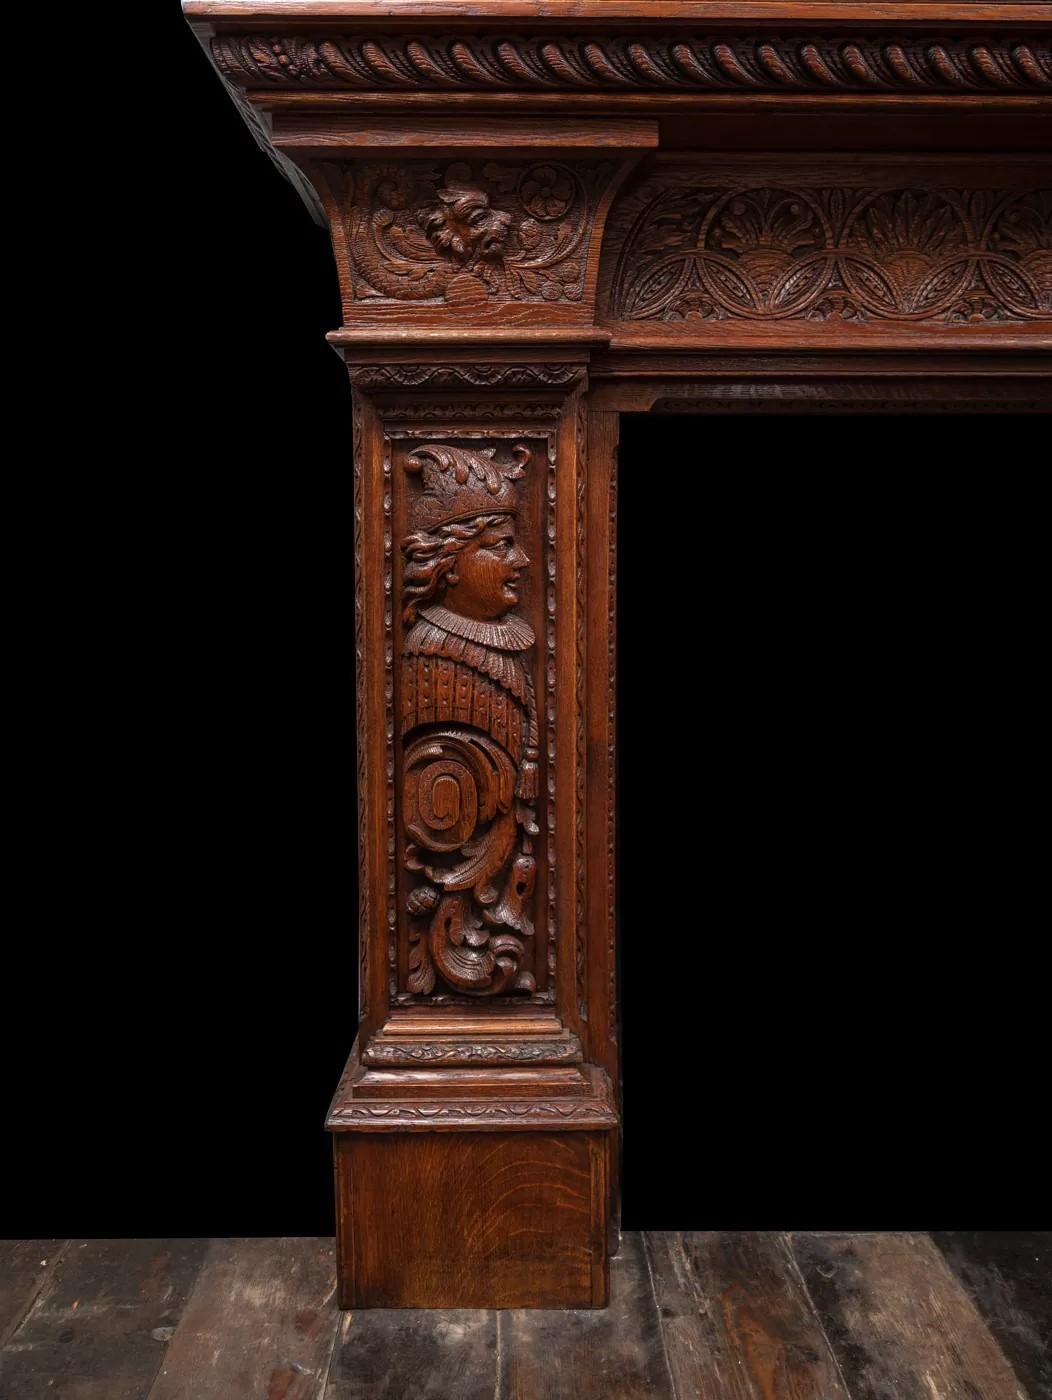 Renaissance Revival An antique oak fireplace surround, made in the Jacobean style. For Sale